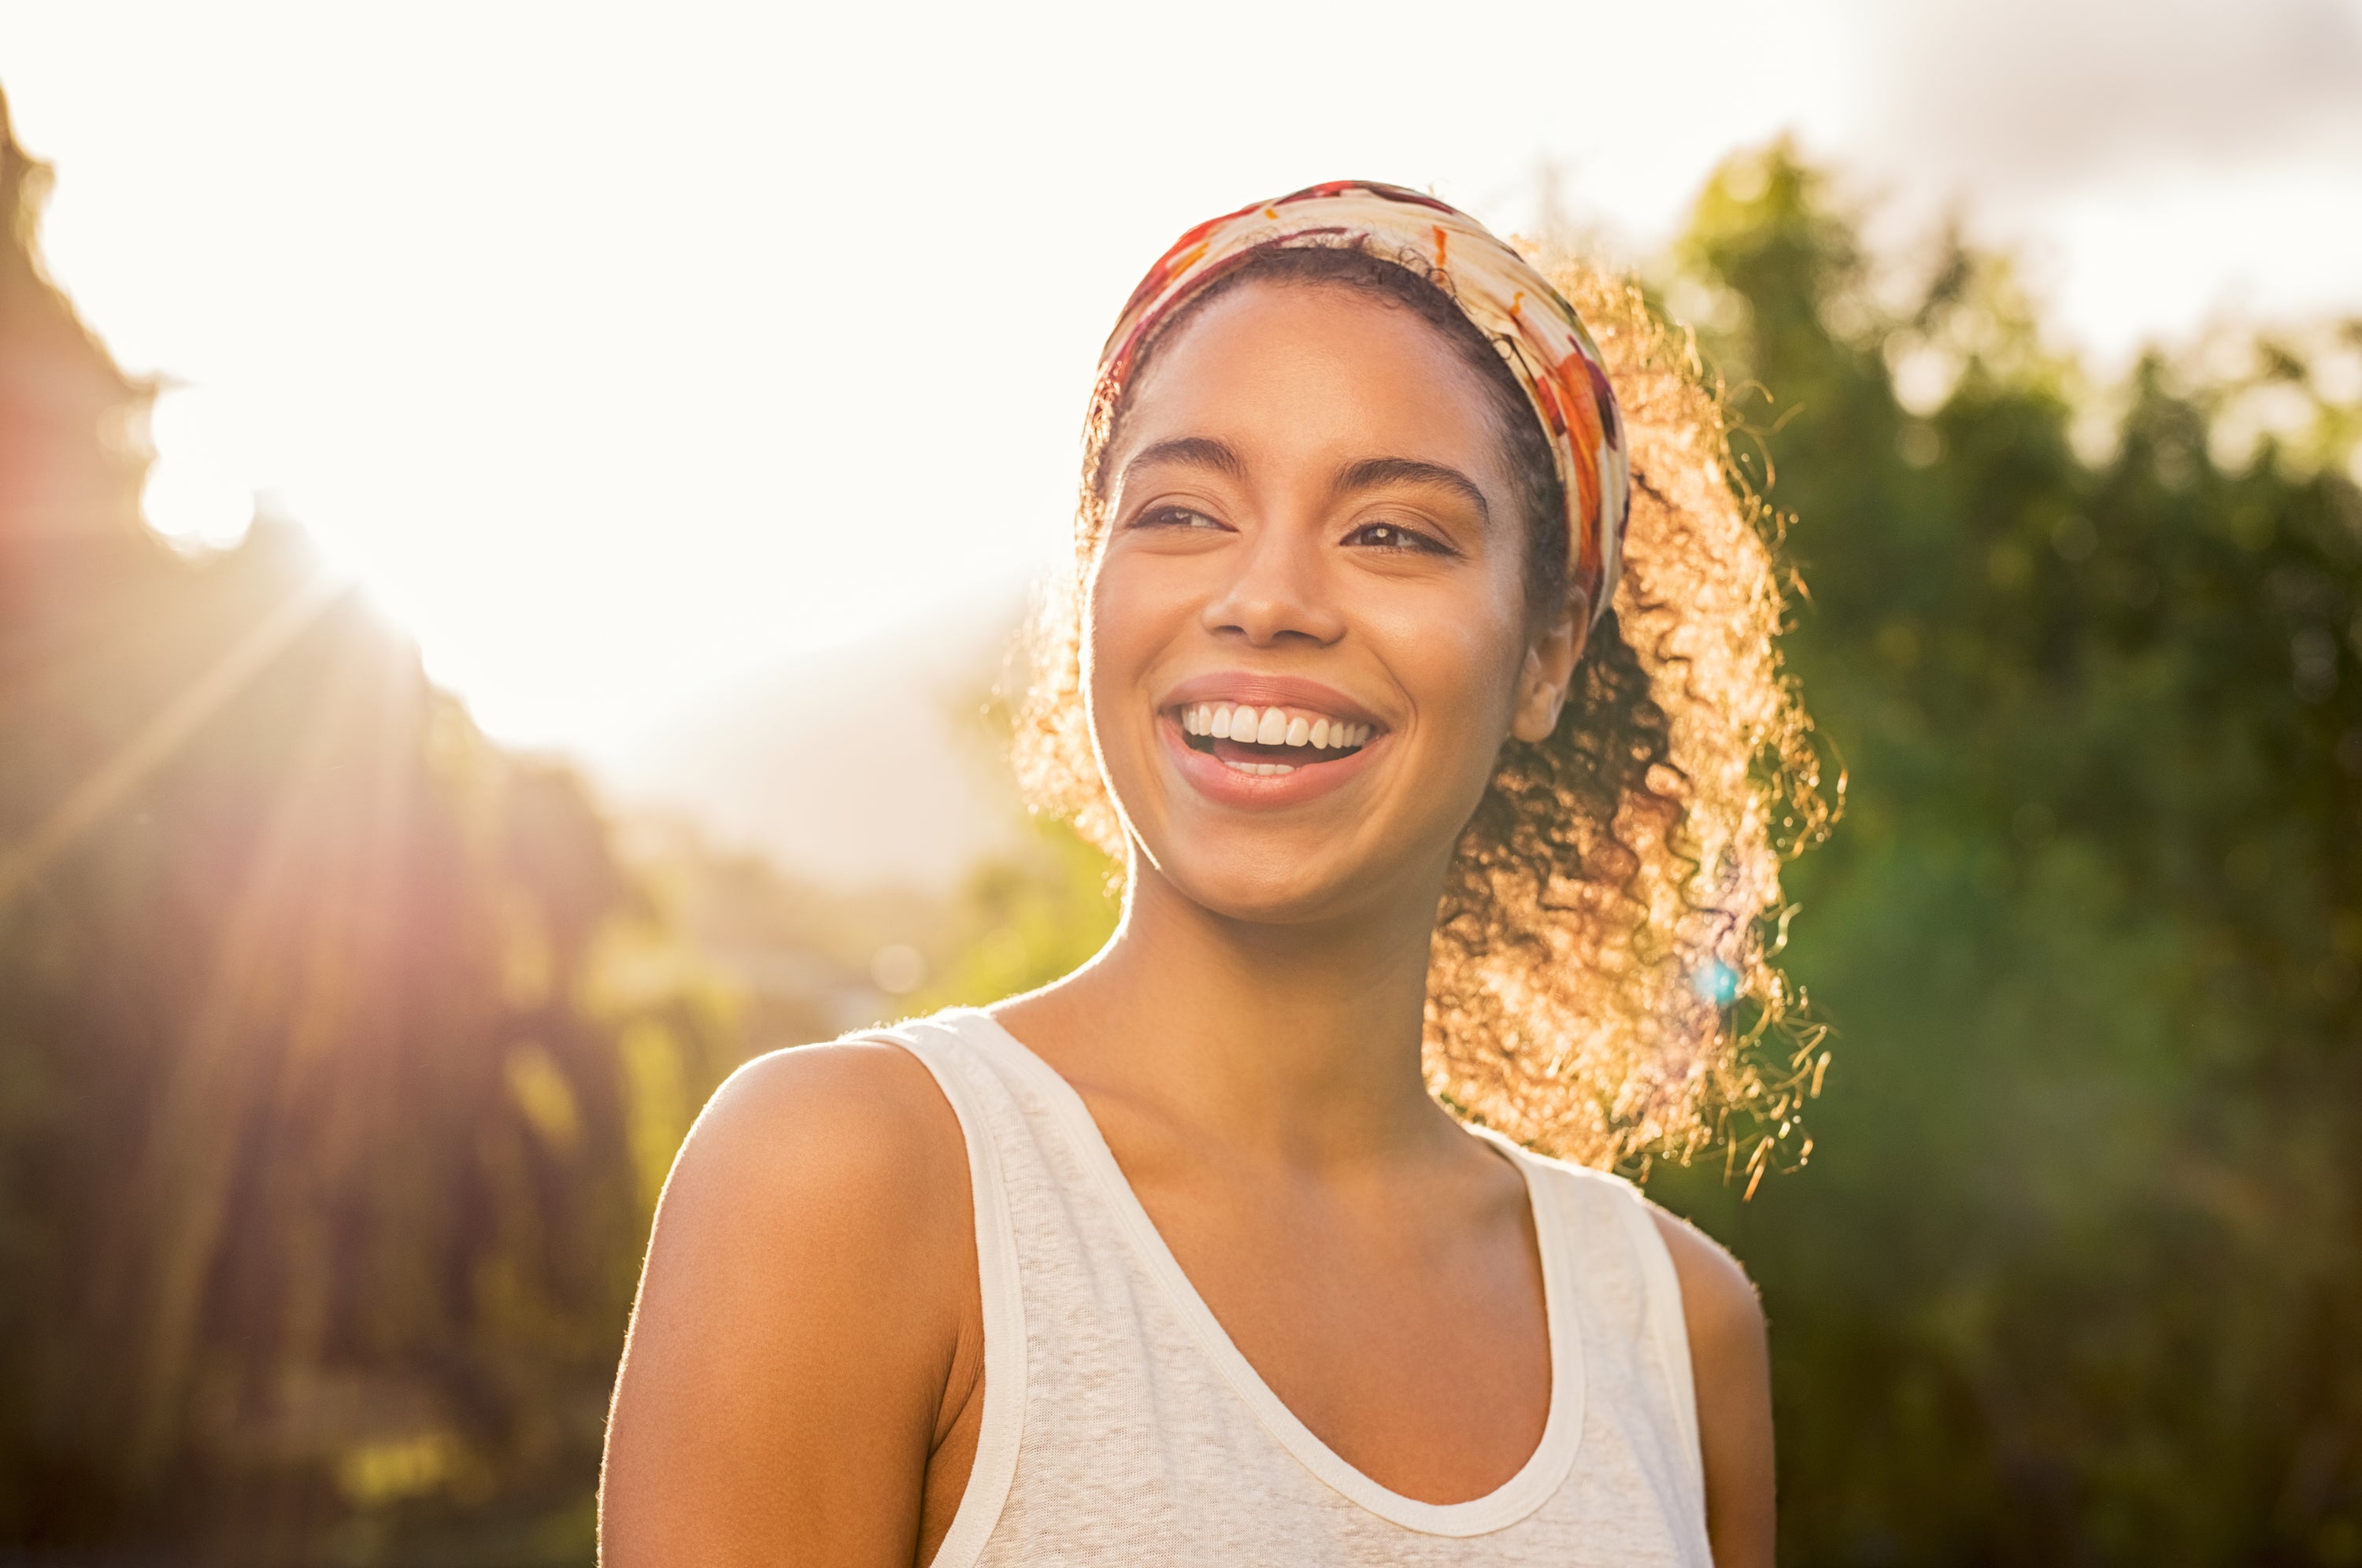 smiling girl with curly hair and headband in sunshine